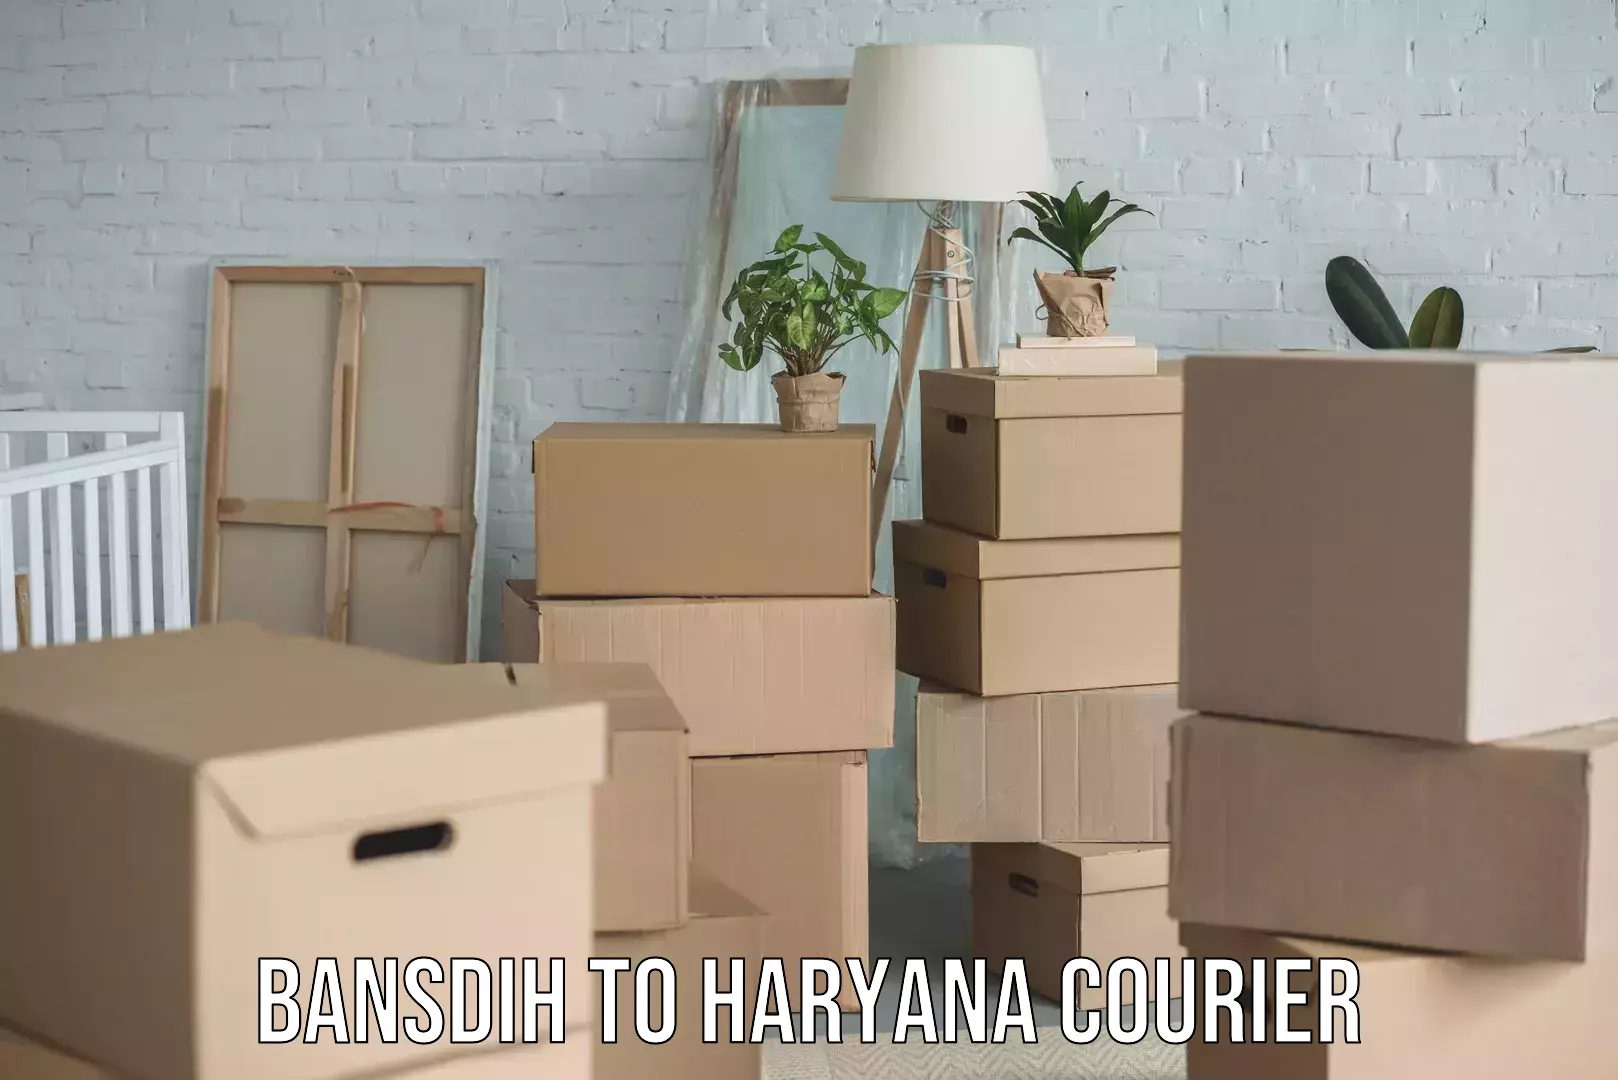 User-friendly delivery service Bansdih to Haryana